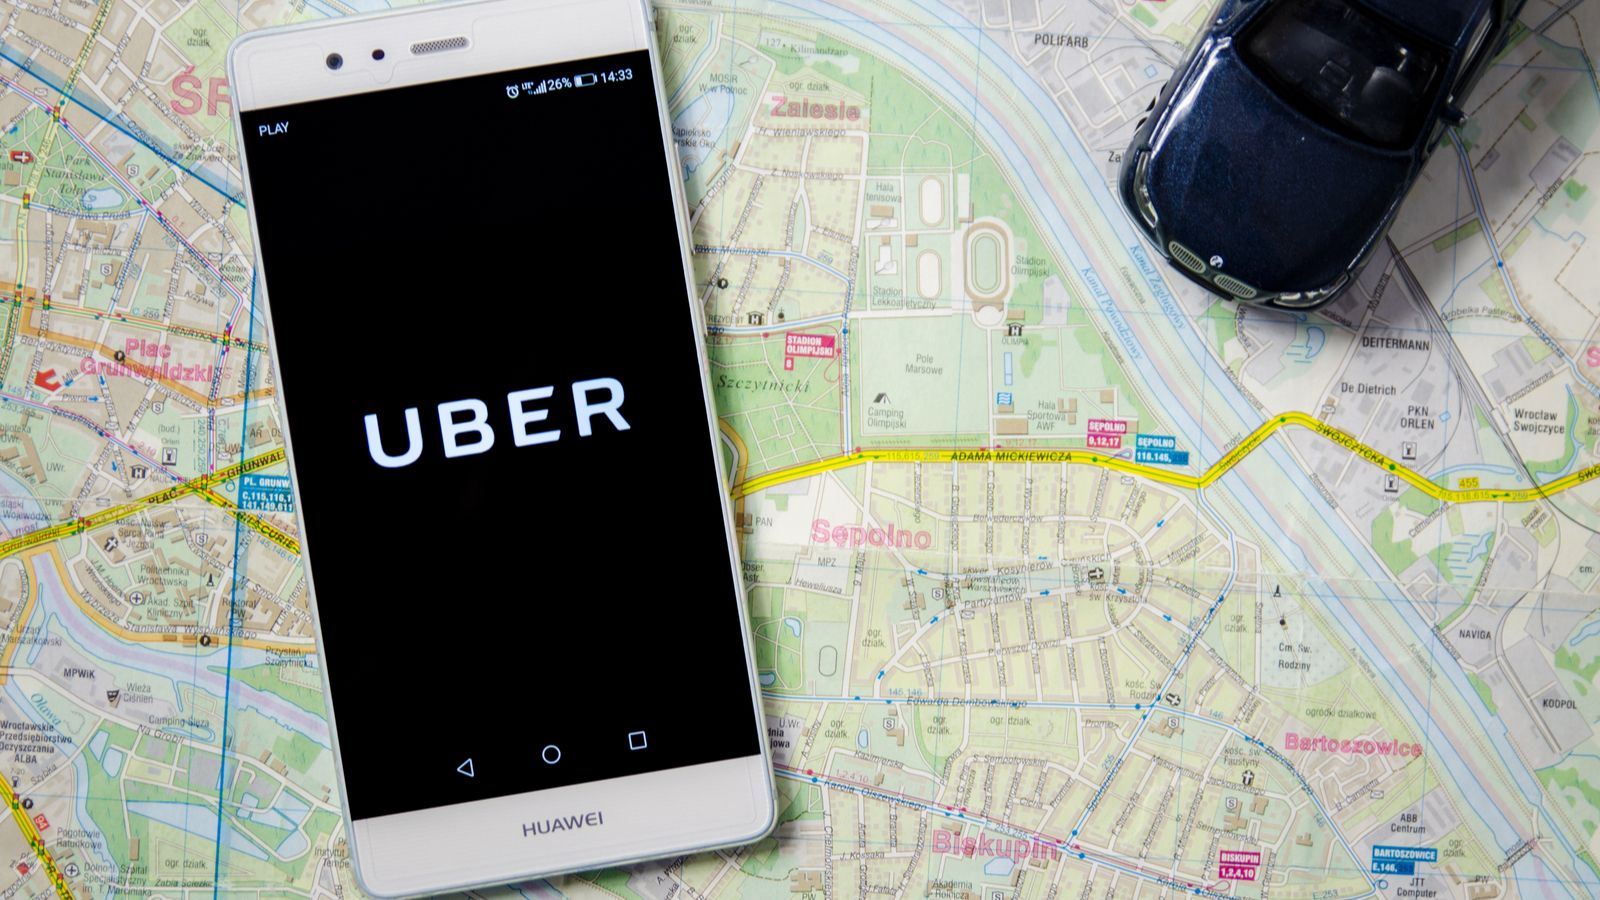 The Uber logo is displayed on a smartphone on top of a map background.